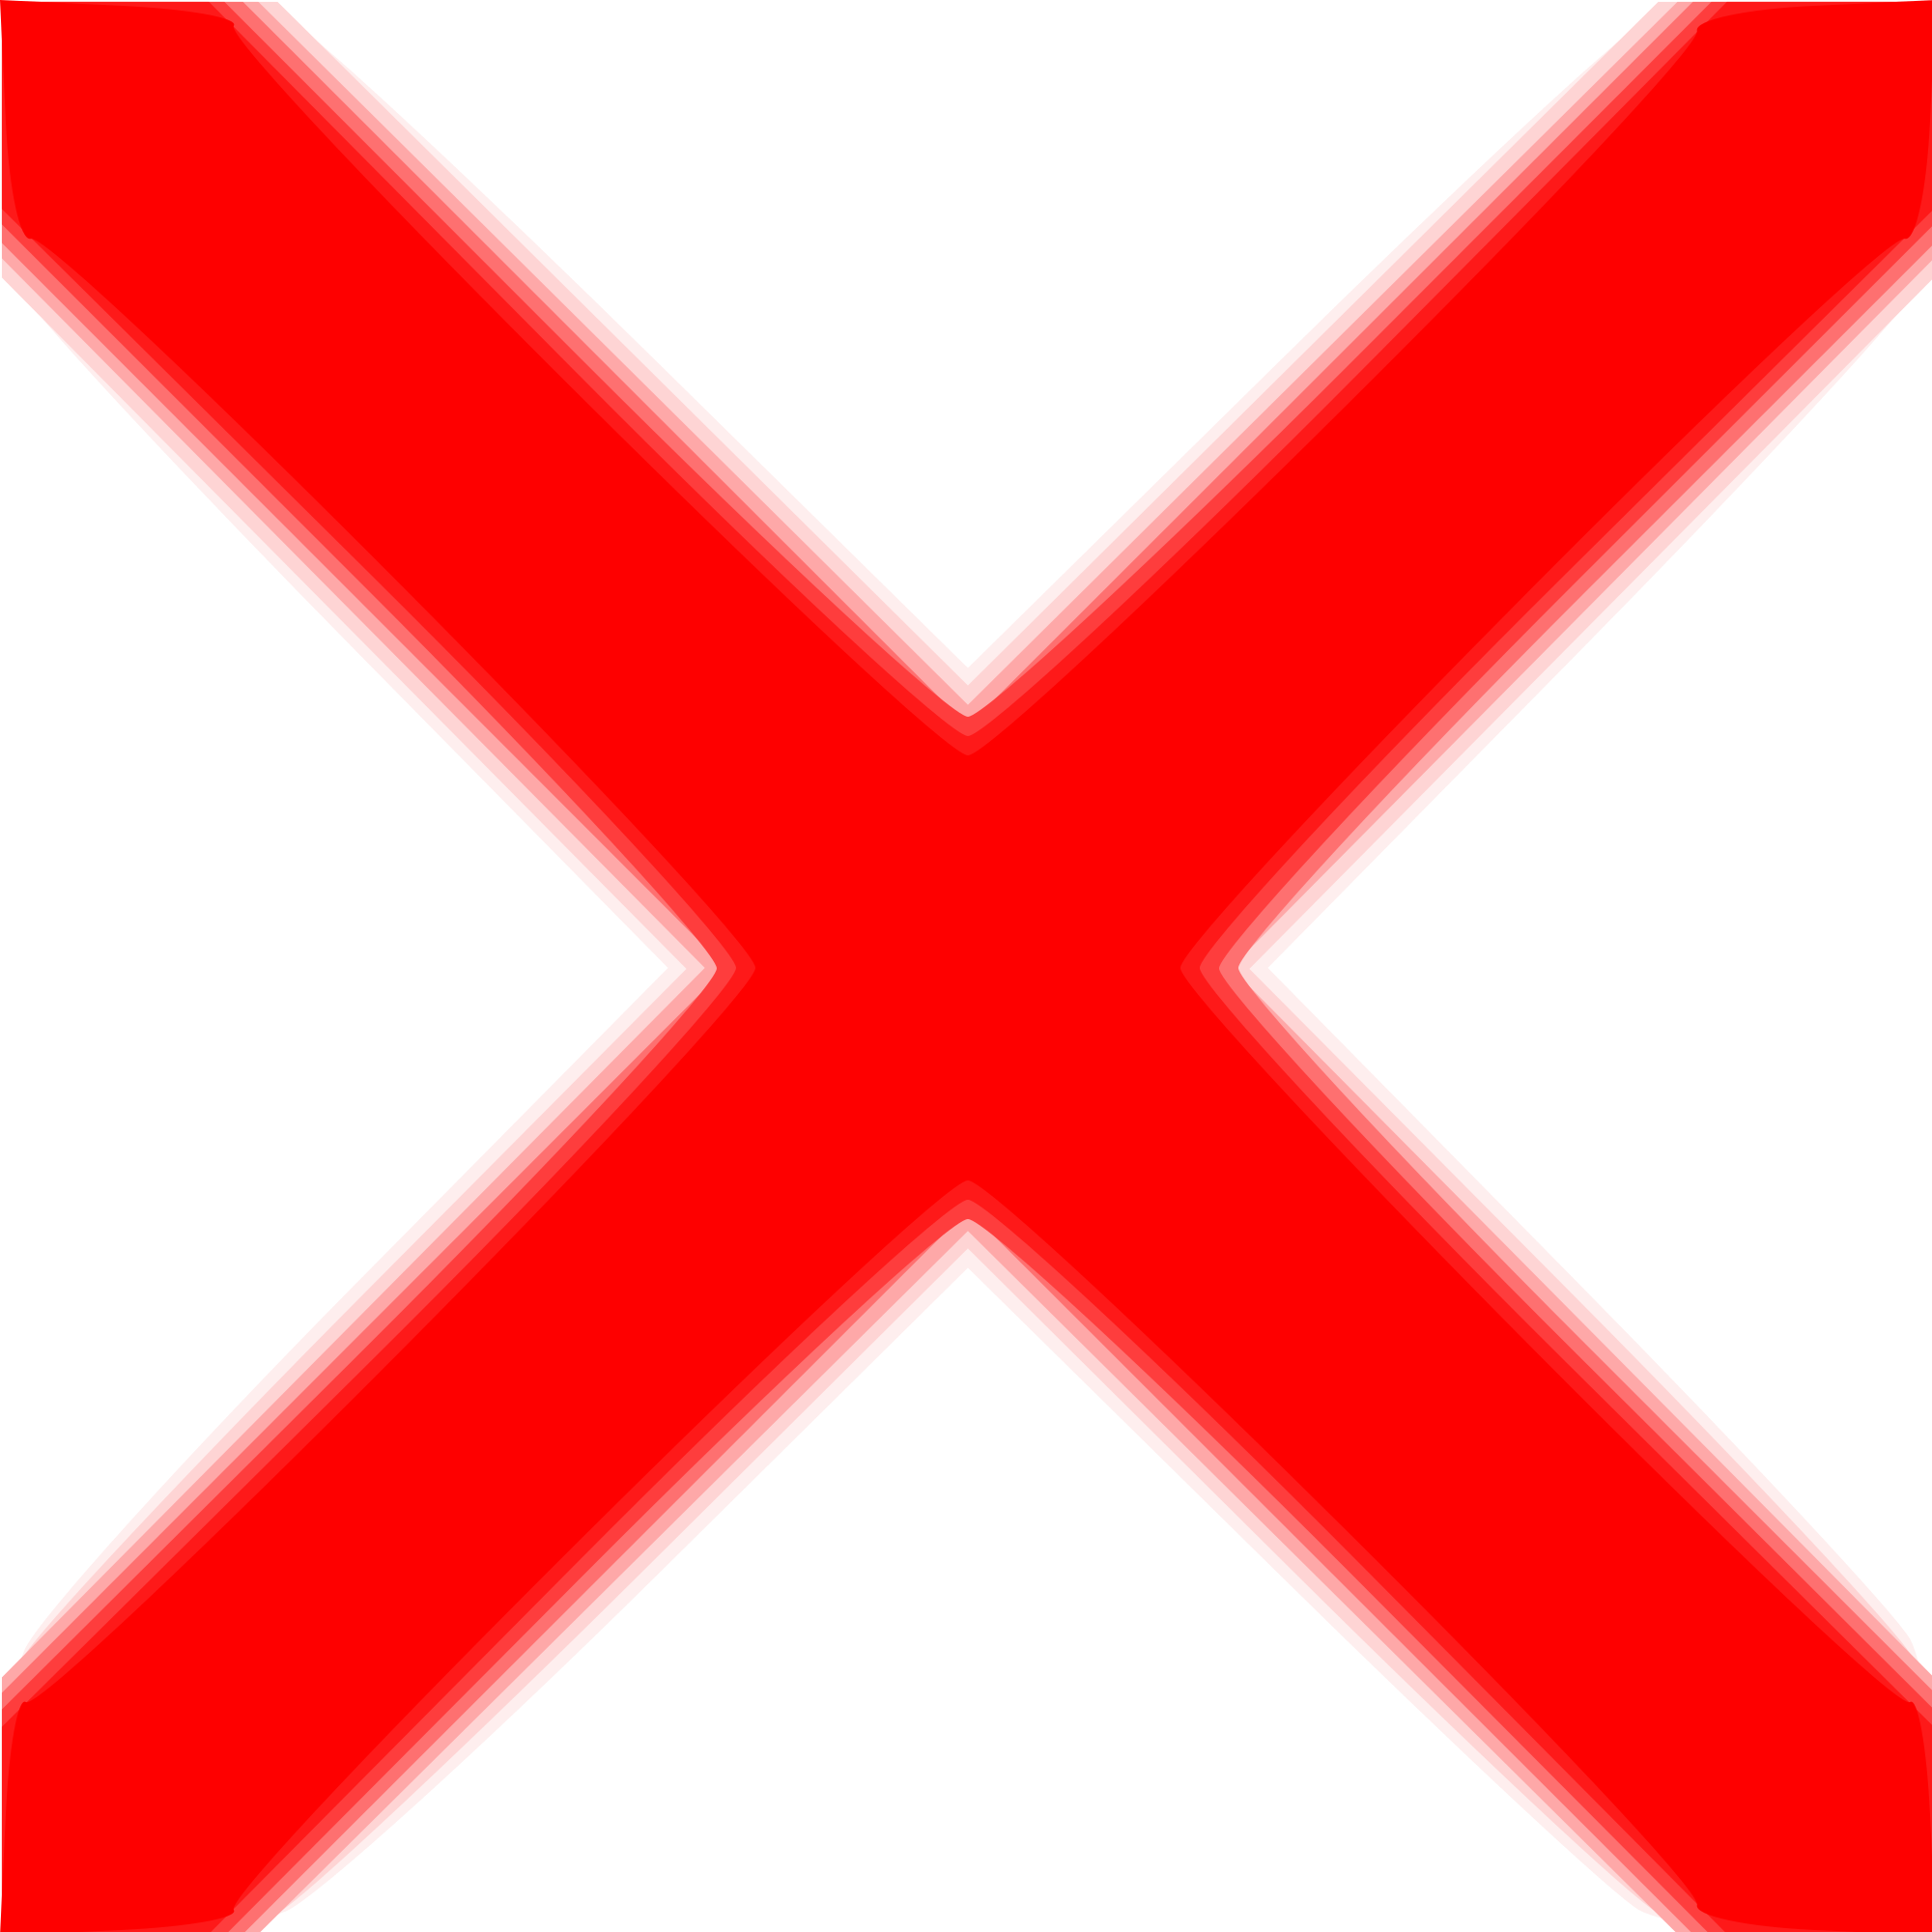 2000px-Red_X_2.svg.png